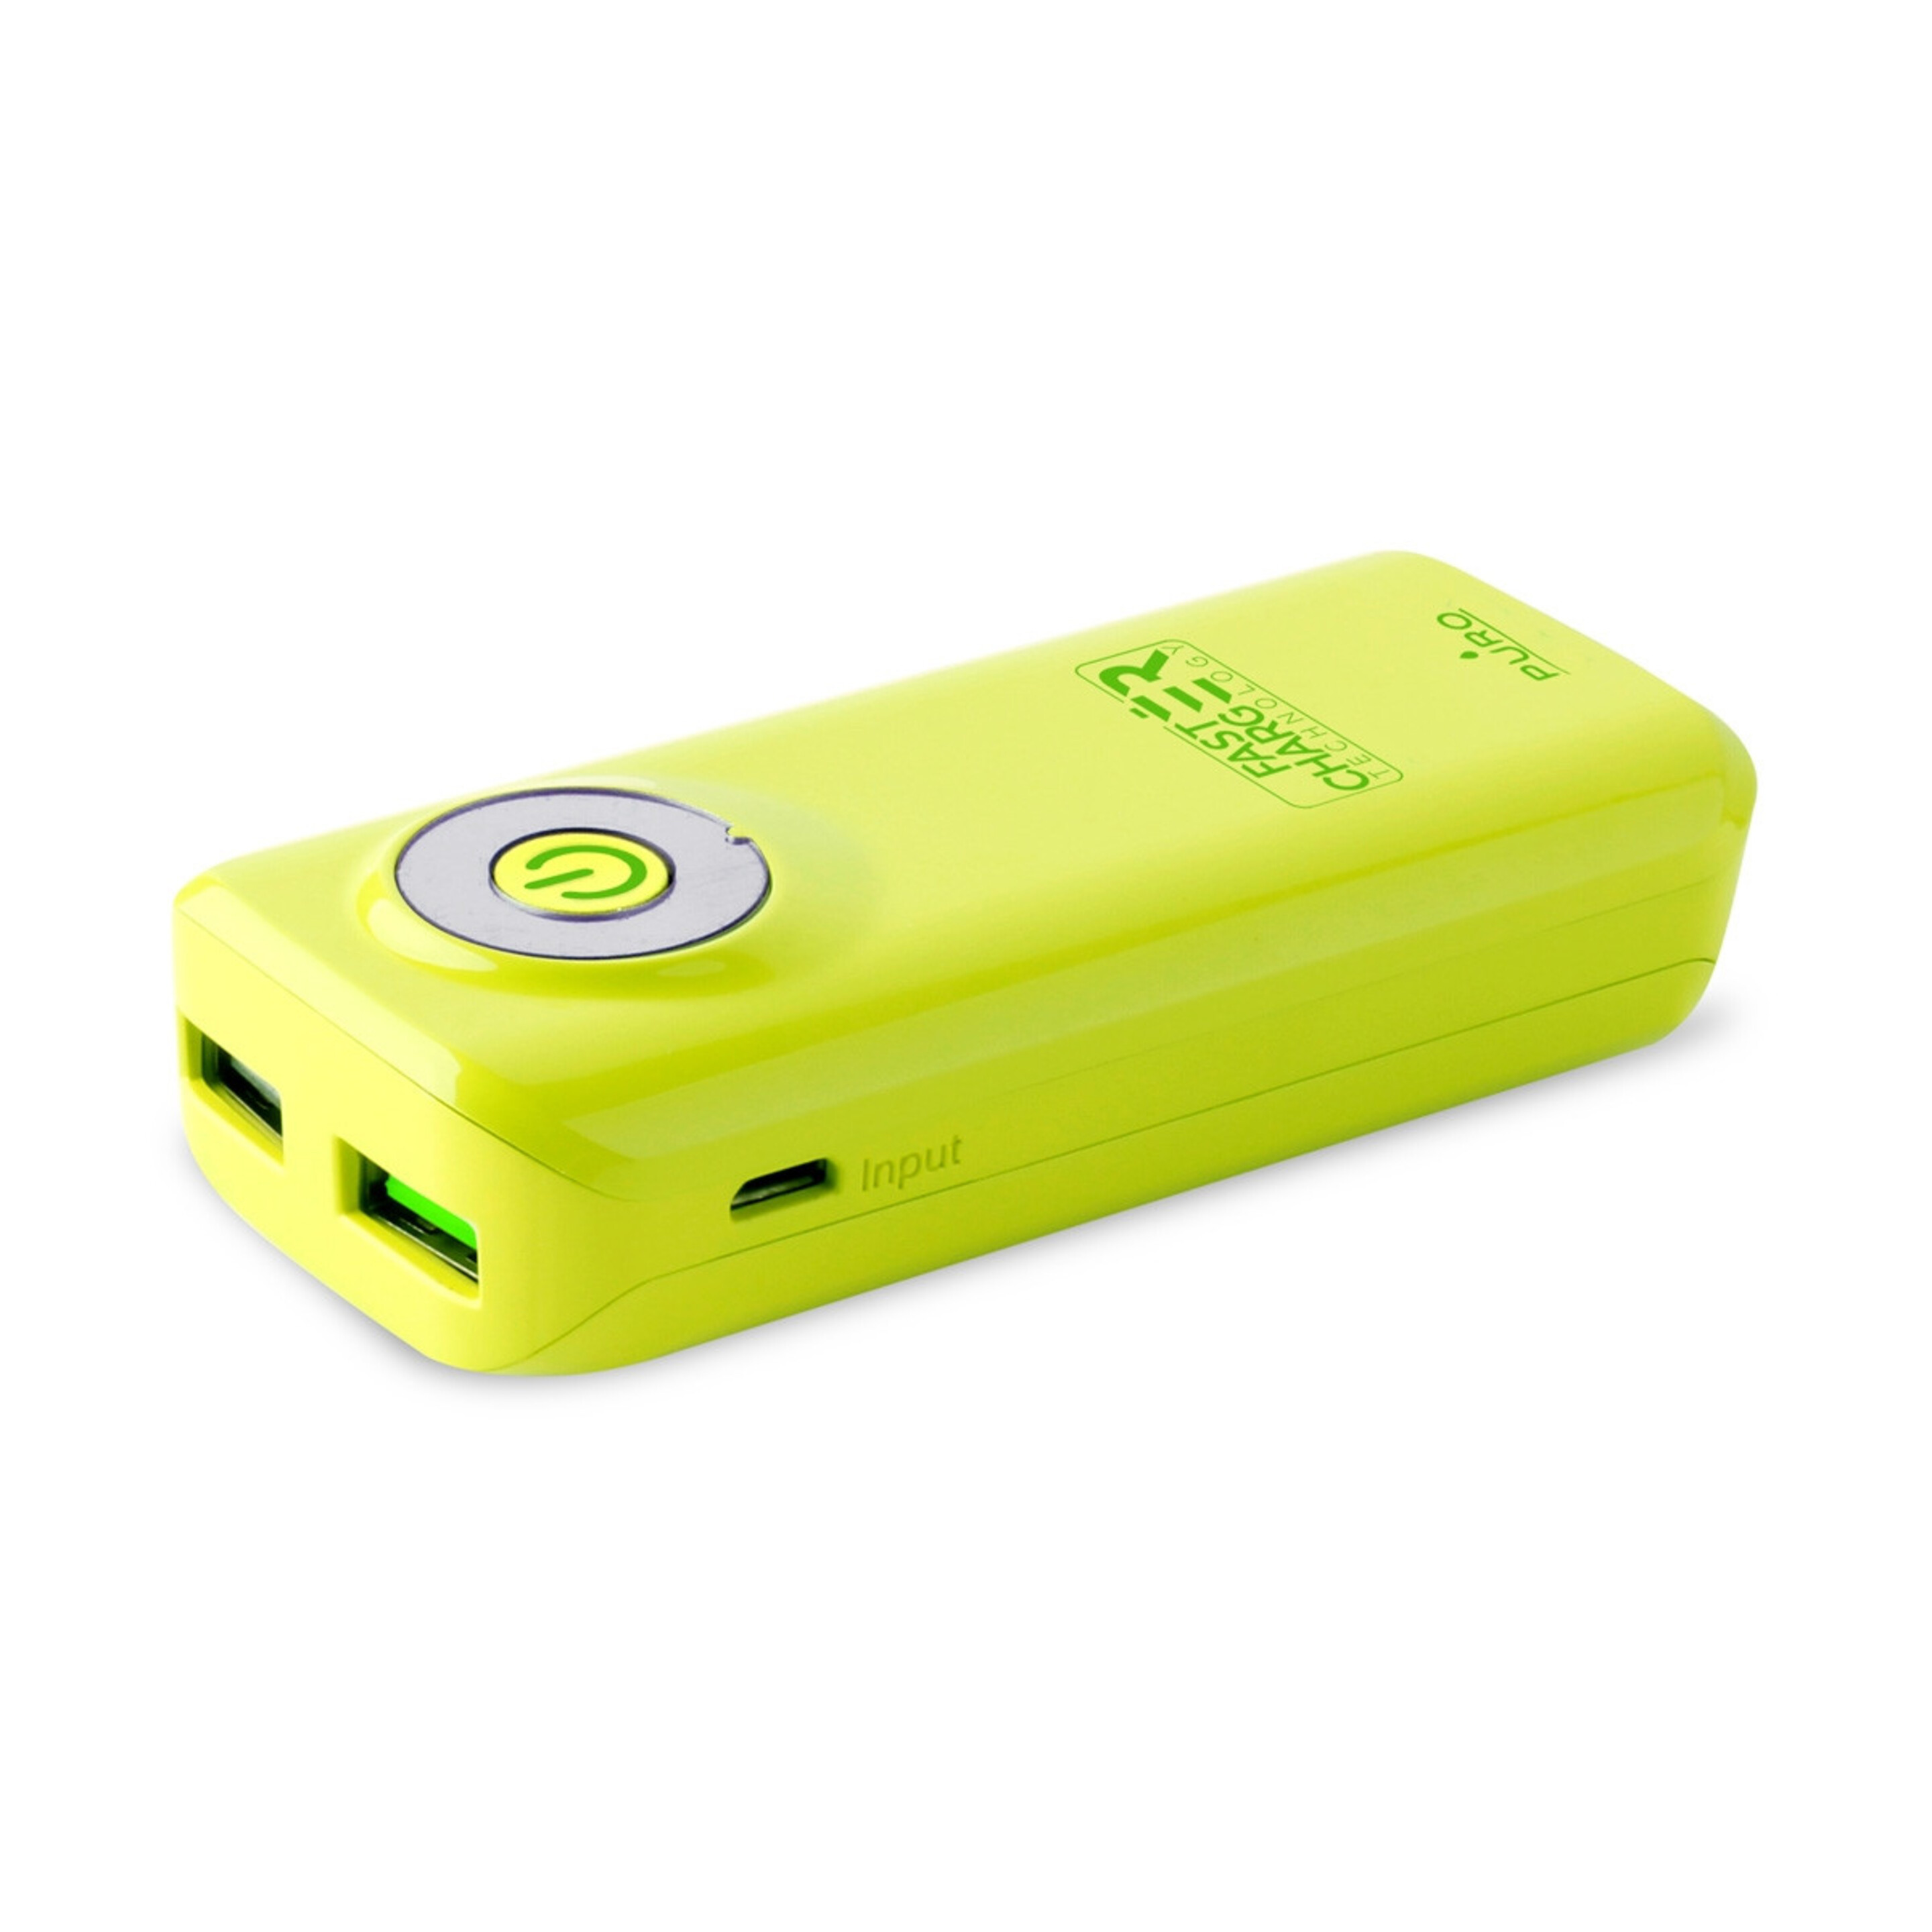 Puro Power Bank 4000 Mah 2 Puertos 2.4a Cable Usb-micro Usb Fast Charge Lima